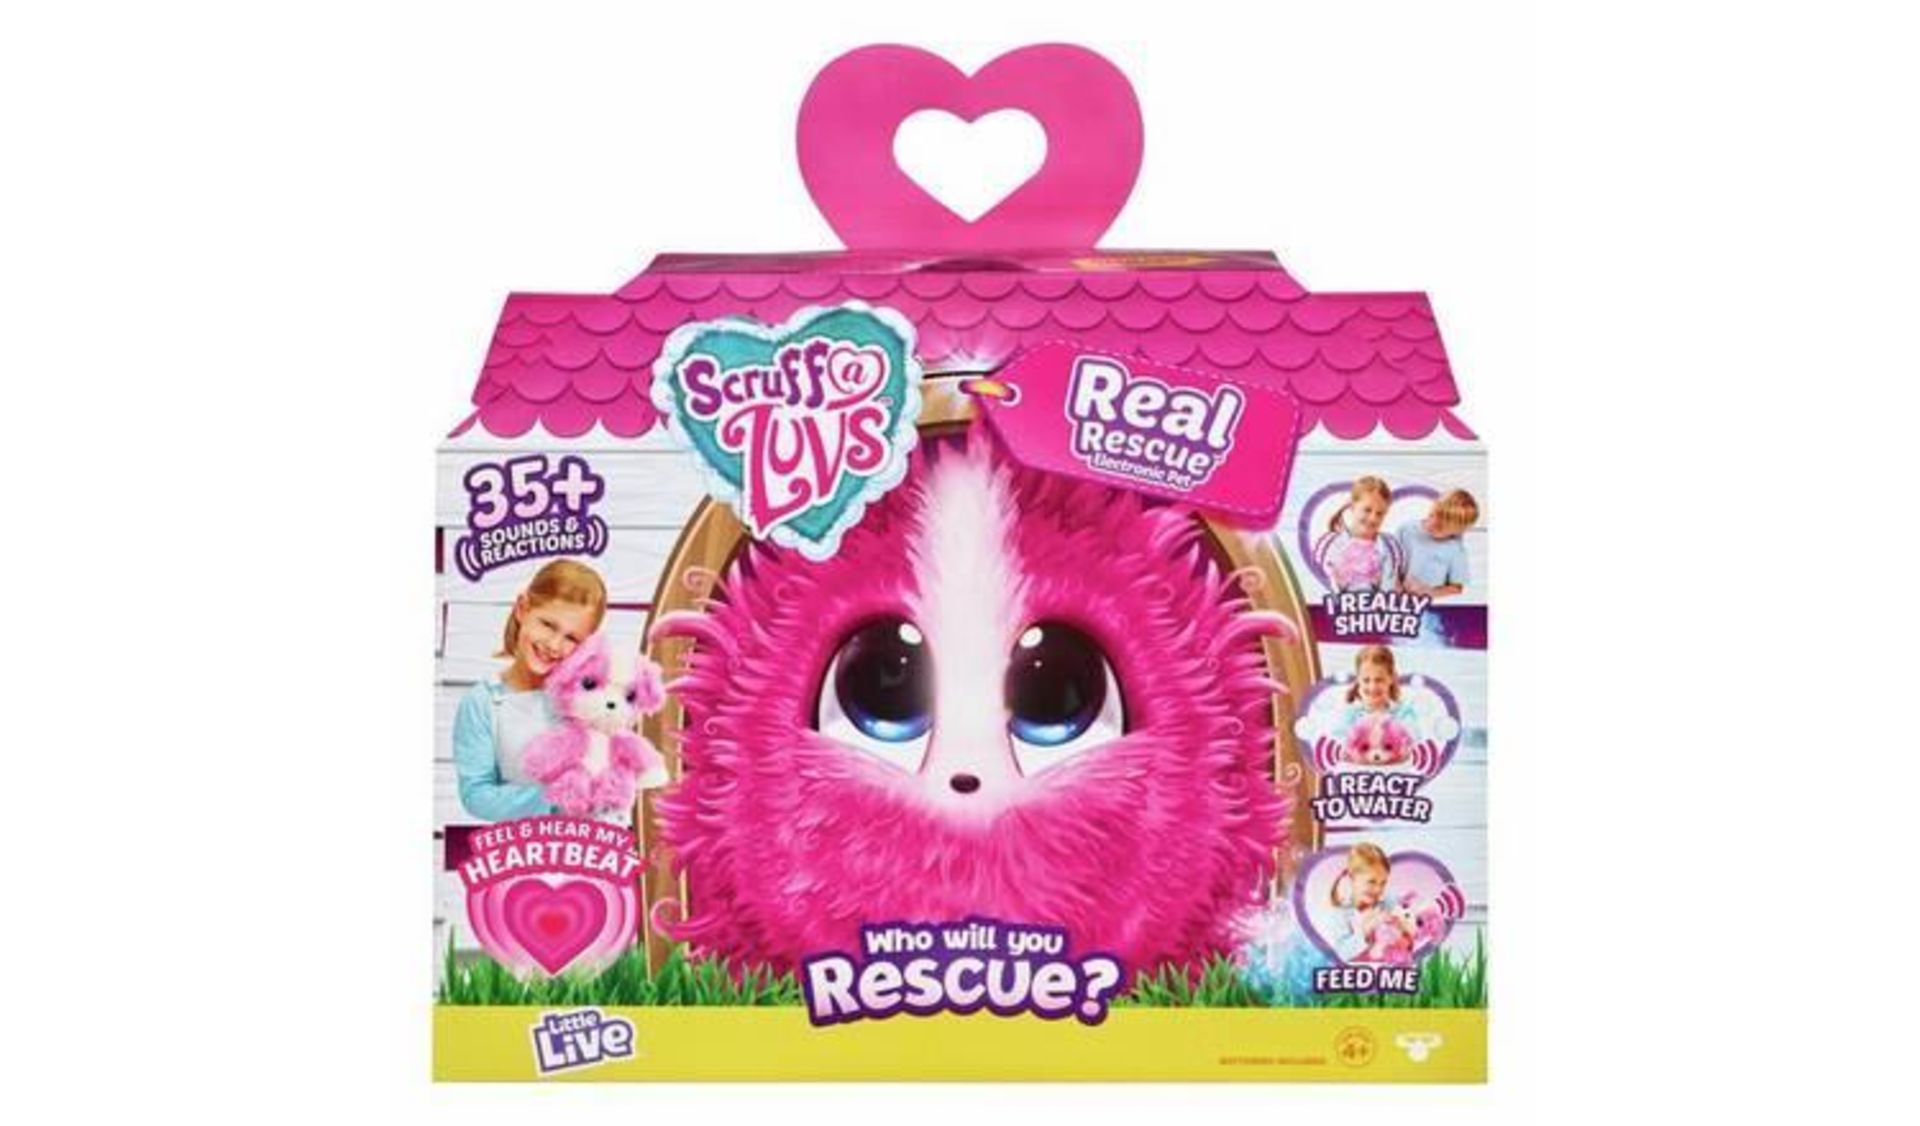 Scruff a Luvs Real Rescue - Surprise Interactive Pet - Pink 137/4436 £30.00 RRP